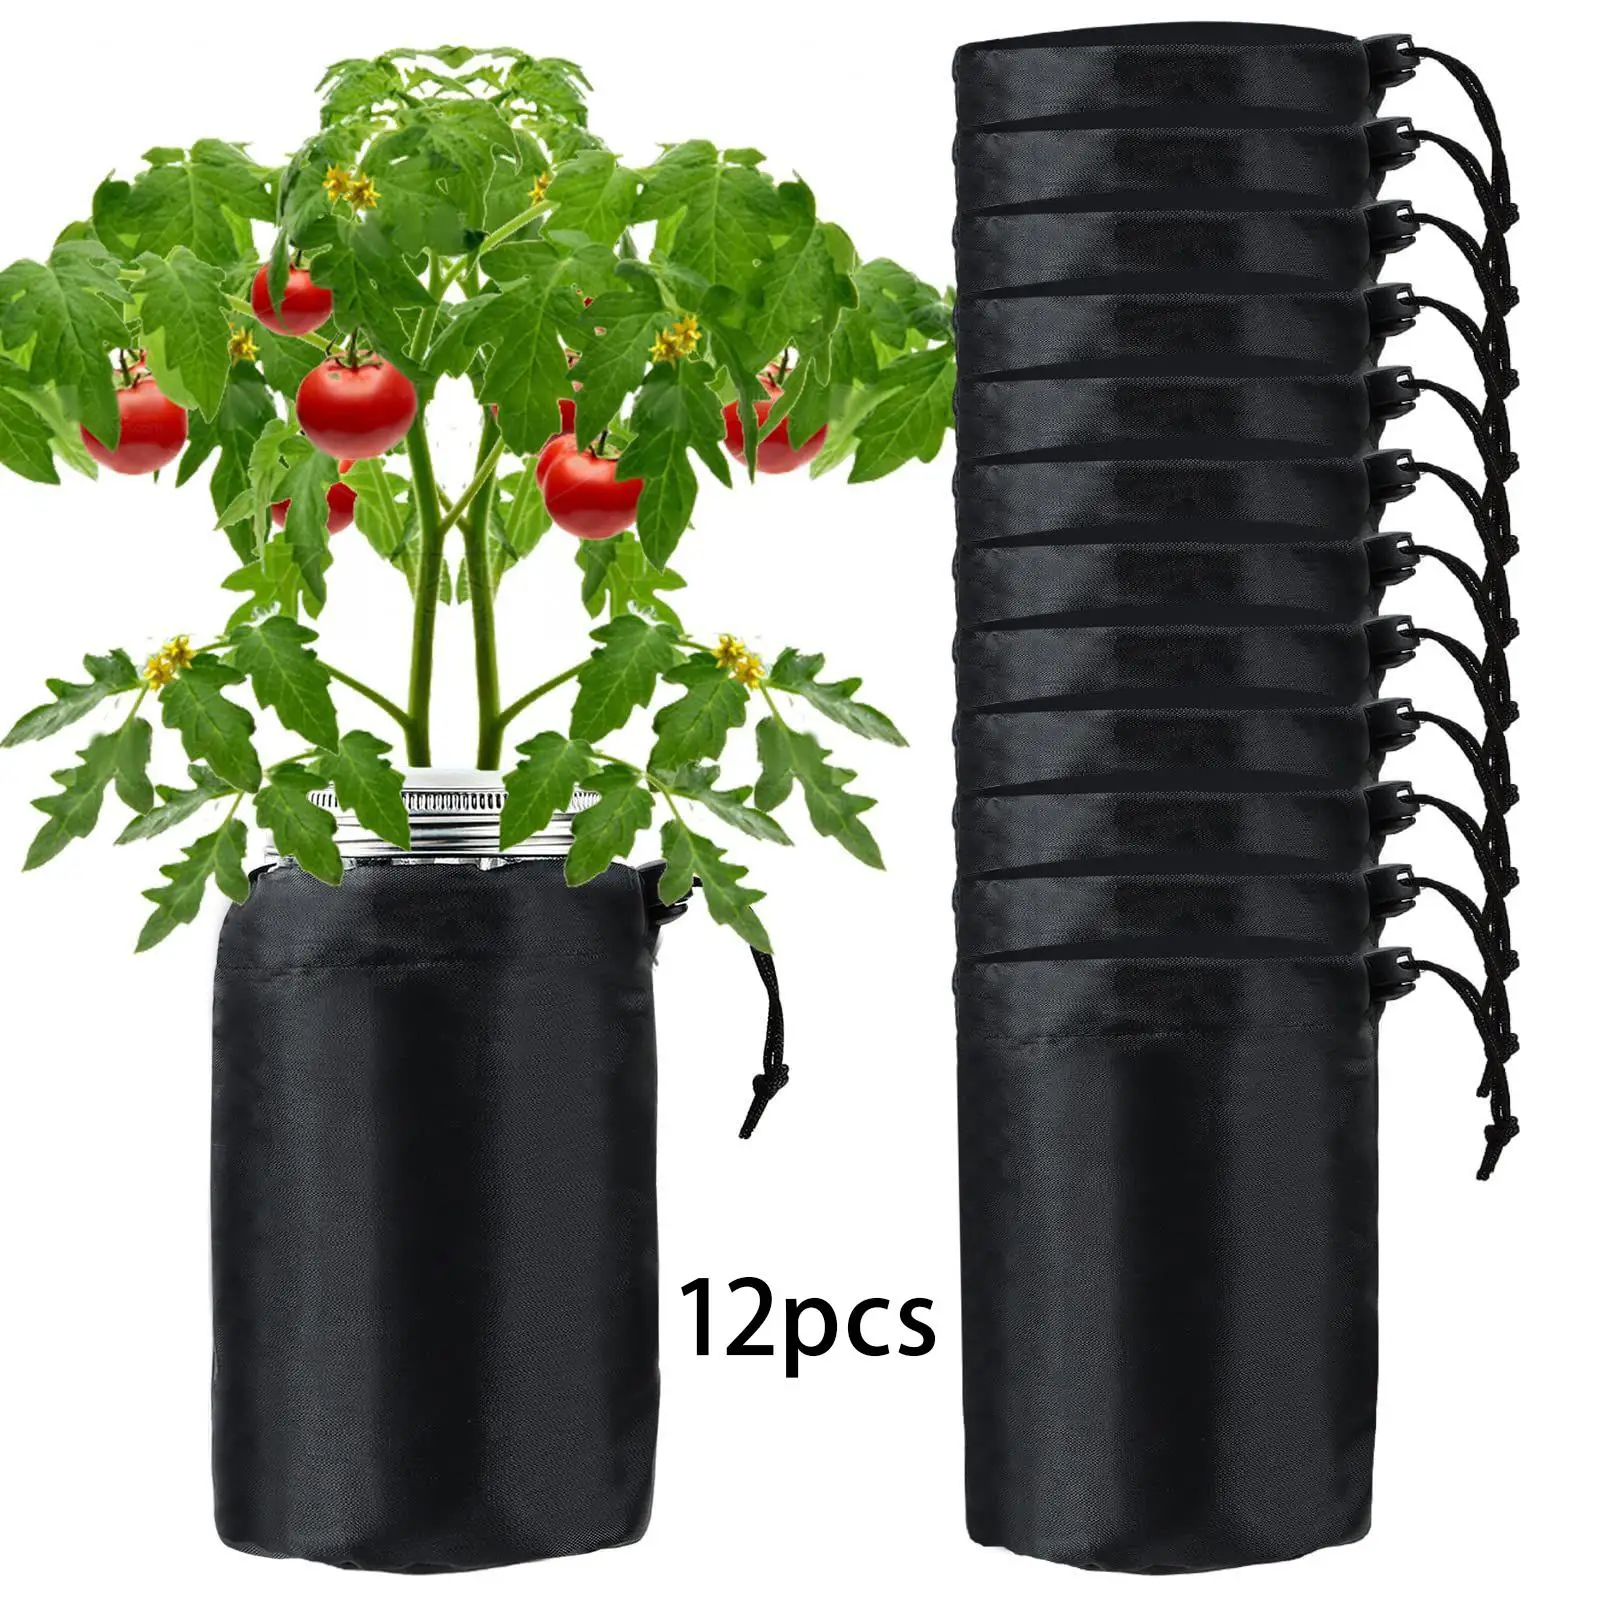 12x Sprouting Jars Sleeves Durable Blackout Hydroponics Jar Covers for Gardens Plants